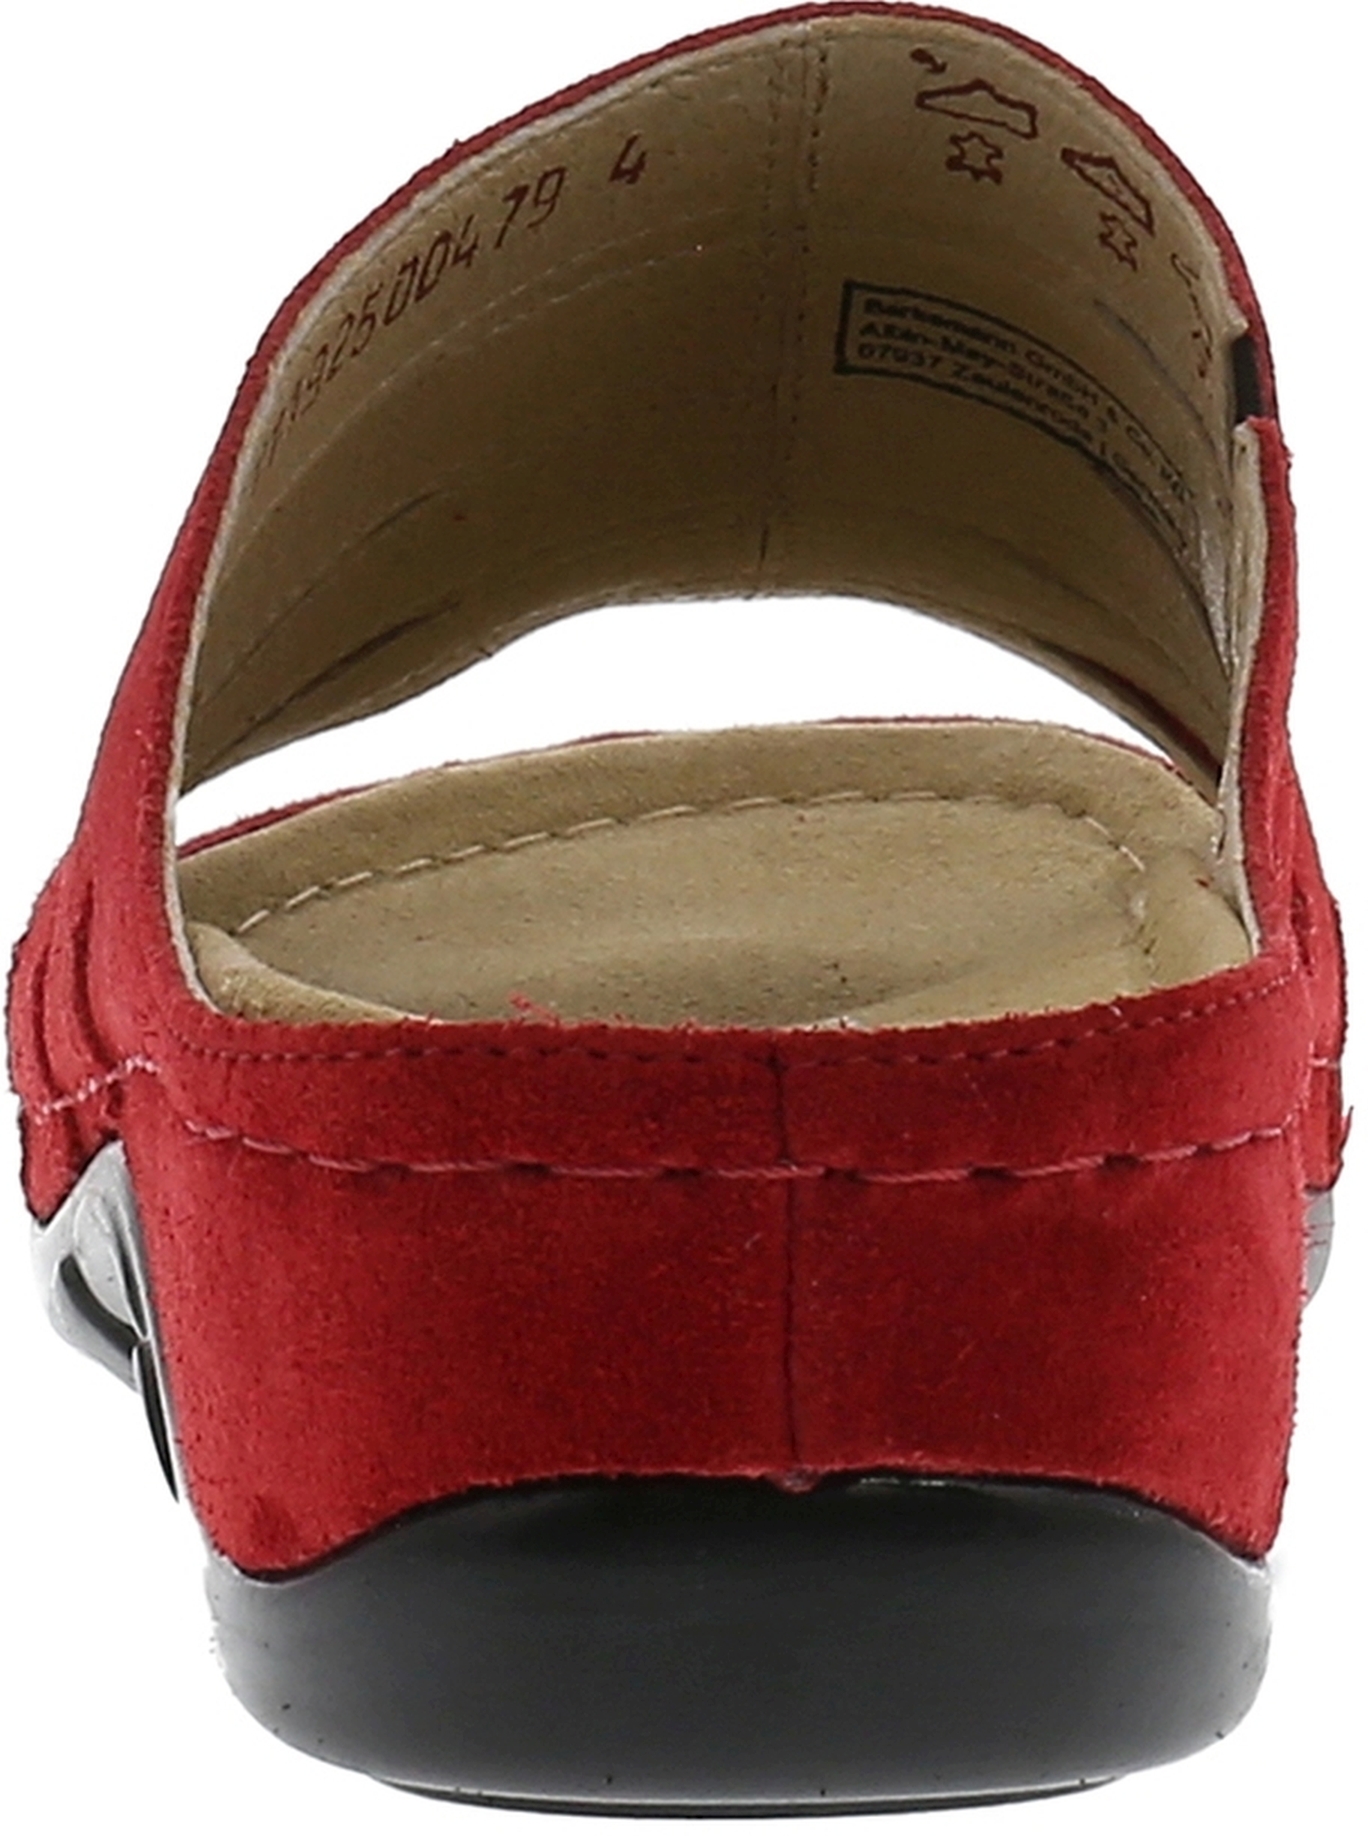 Bine Red suede leather